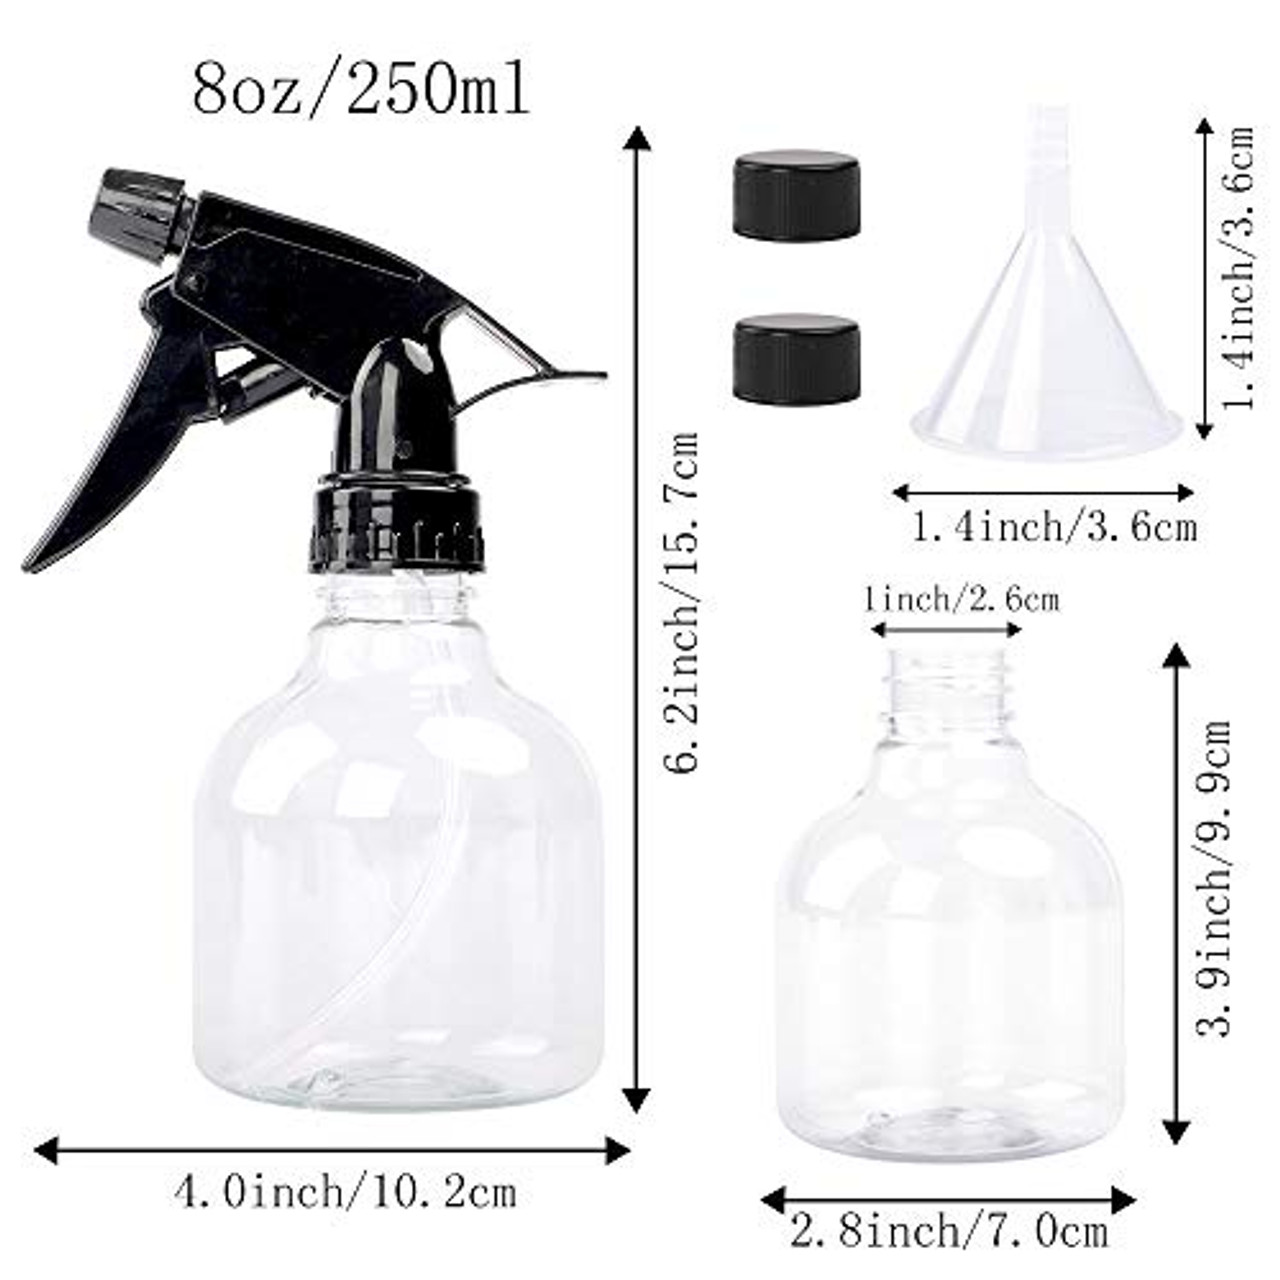 8 Pack, 8oz Empty Clear Plastic Spray Bottles with Trigger Sprayers, Fine  Mist Adjustable Nozzle for